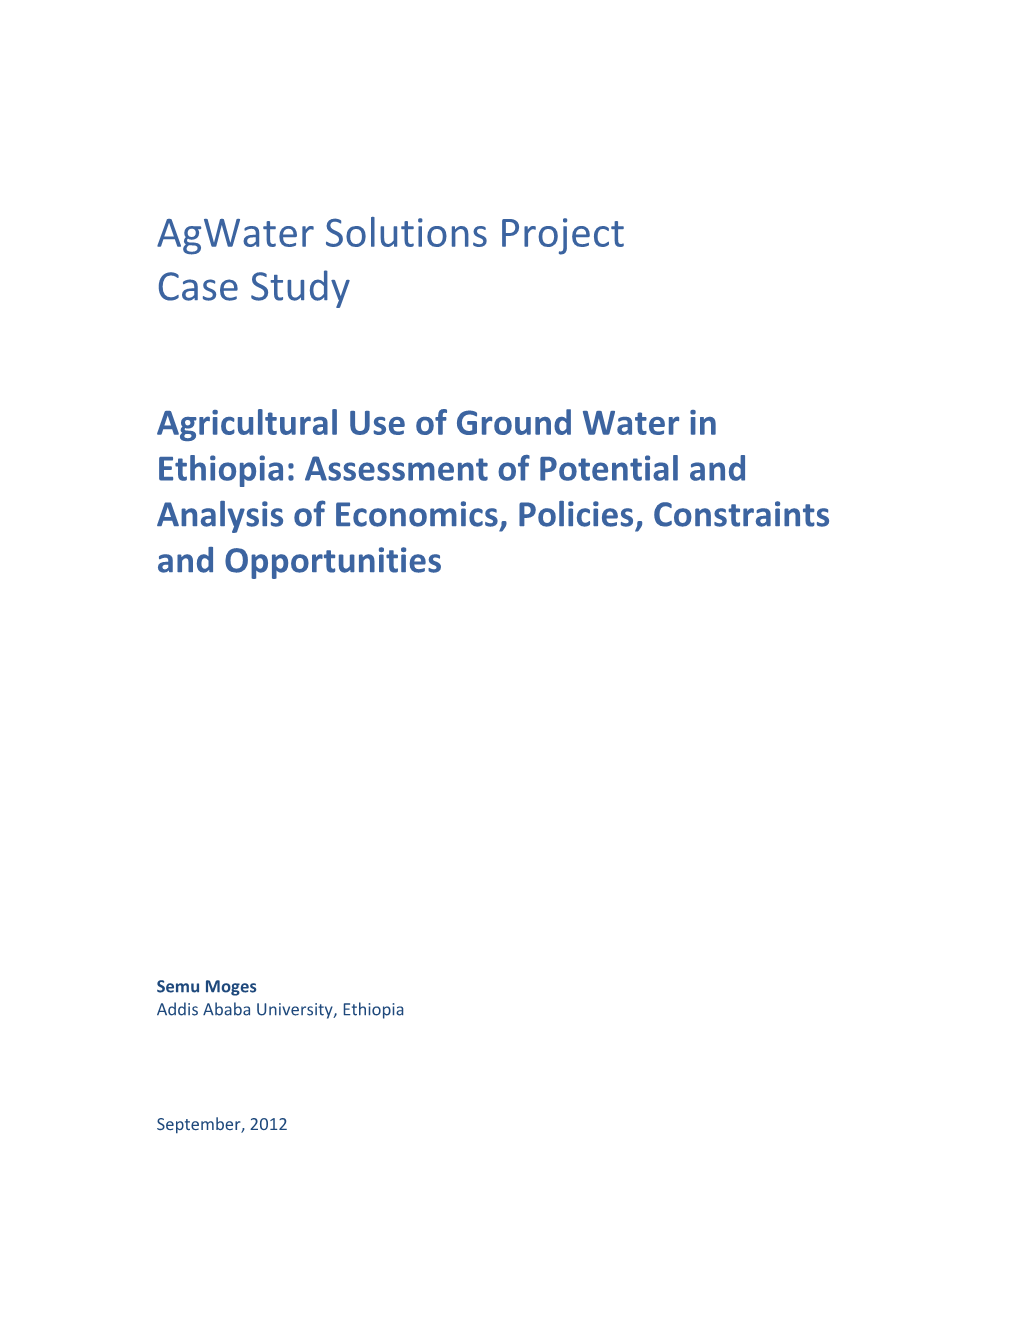 Agwater Solutions Project Case Study